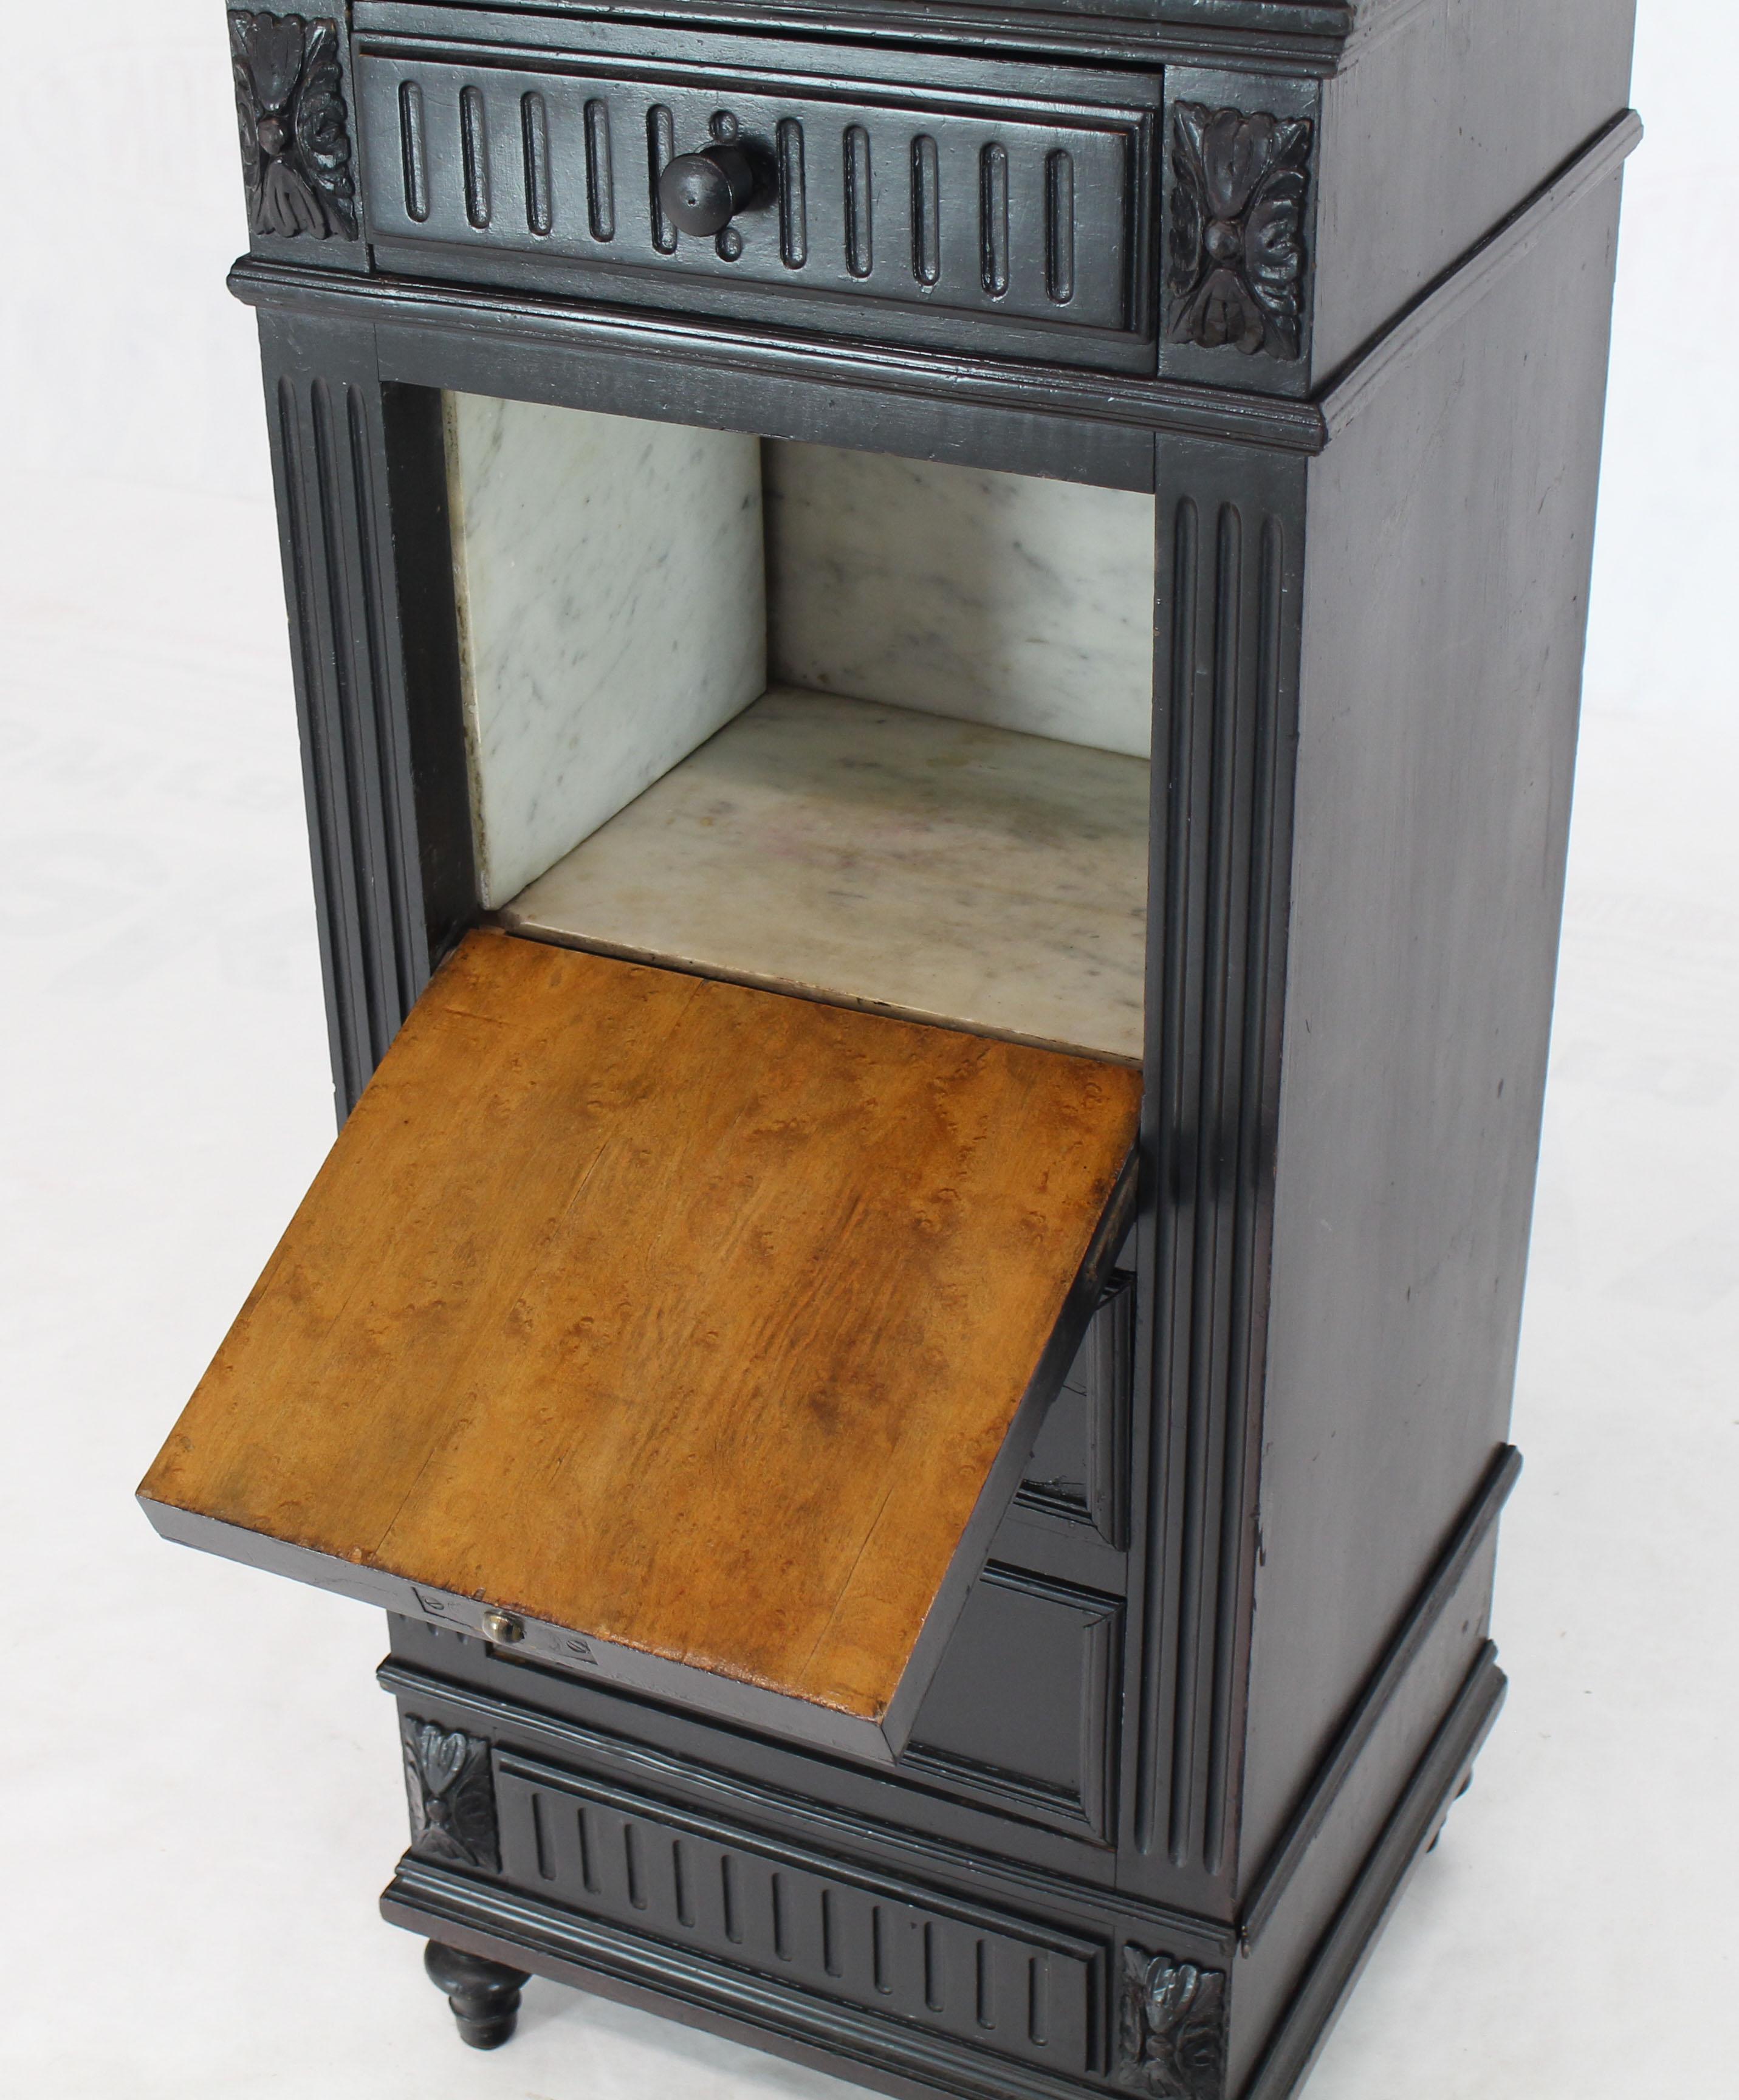 Antique tall pedestal shape marble top cabinet barber stand drop front door compartment.
Hand dovetailed oak drawers. This will make a nice cabinet with cigars compartment smoker stand.